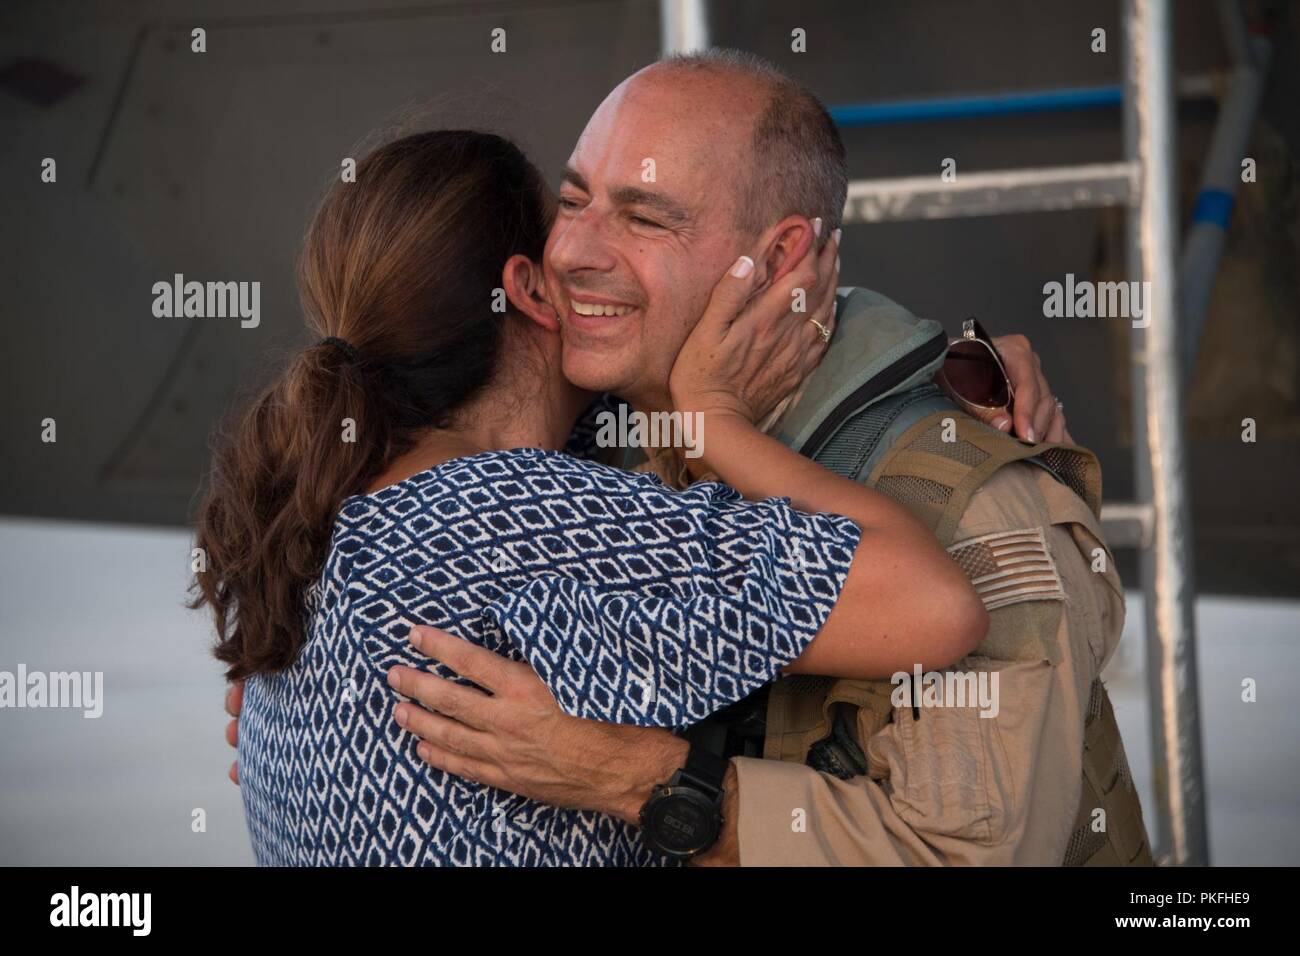 U.S. Air Force Lt. Gen. Jeffrey L. Harrigian, Commander U.S. Air Forces Central Command, hugs his wife after his final flight, or “fini flight,” at Al Dhafra Air Base, August 8, 2018. Lt. Gen. Harrigian took command of AFCENT in July 2016, and has led U.S. and Coalition air operations against ISIS as part of Operation Inherent Resolve in Iraq and Syria and against the Taliban and terrorist networks in Afghanistan as part of Operation Freedom’s Sentinel and the NATO Resolute Support mission in Afghanistan. Stock Photo